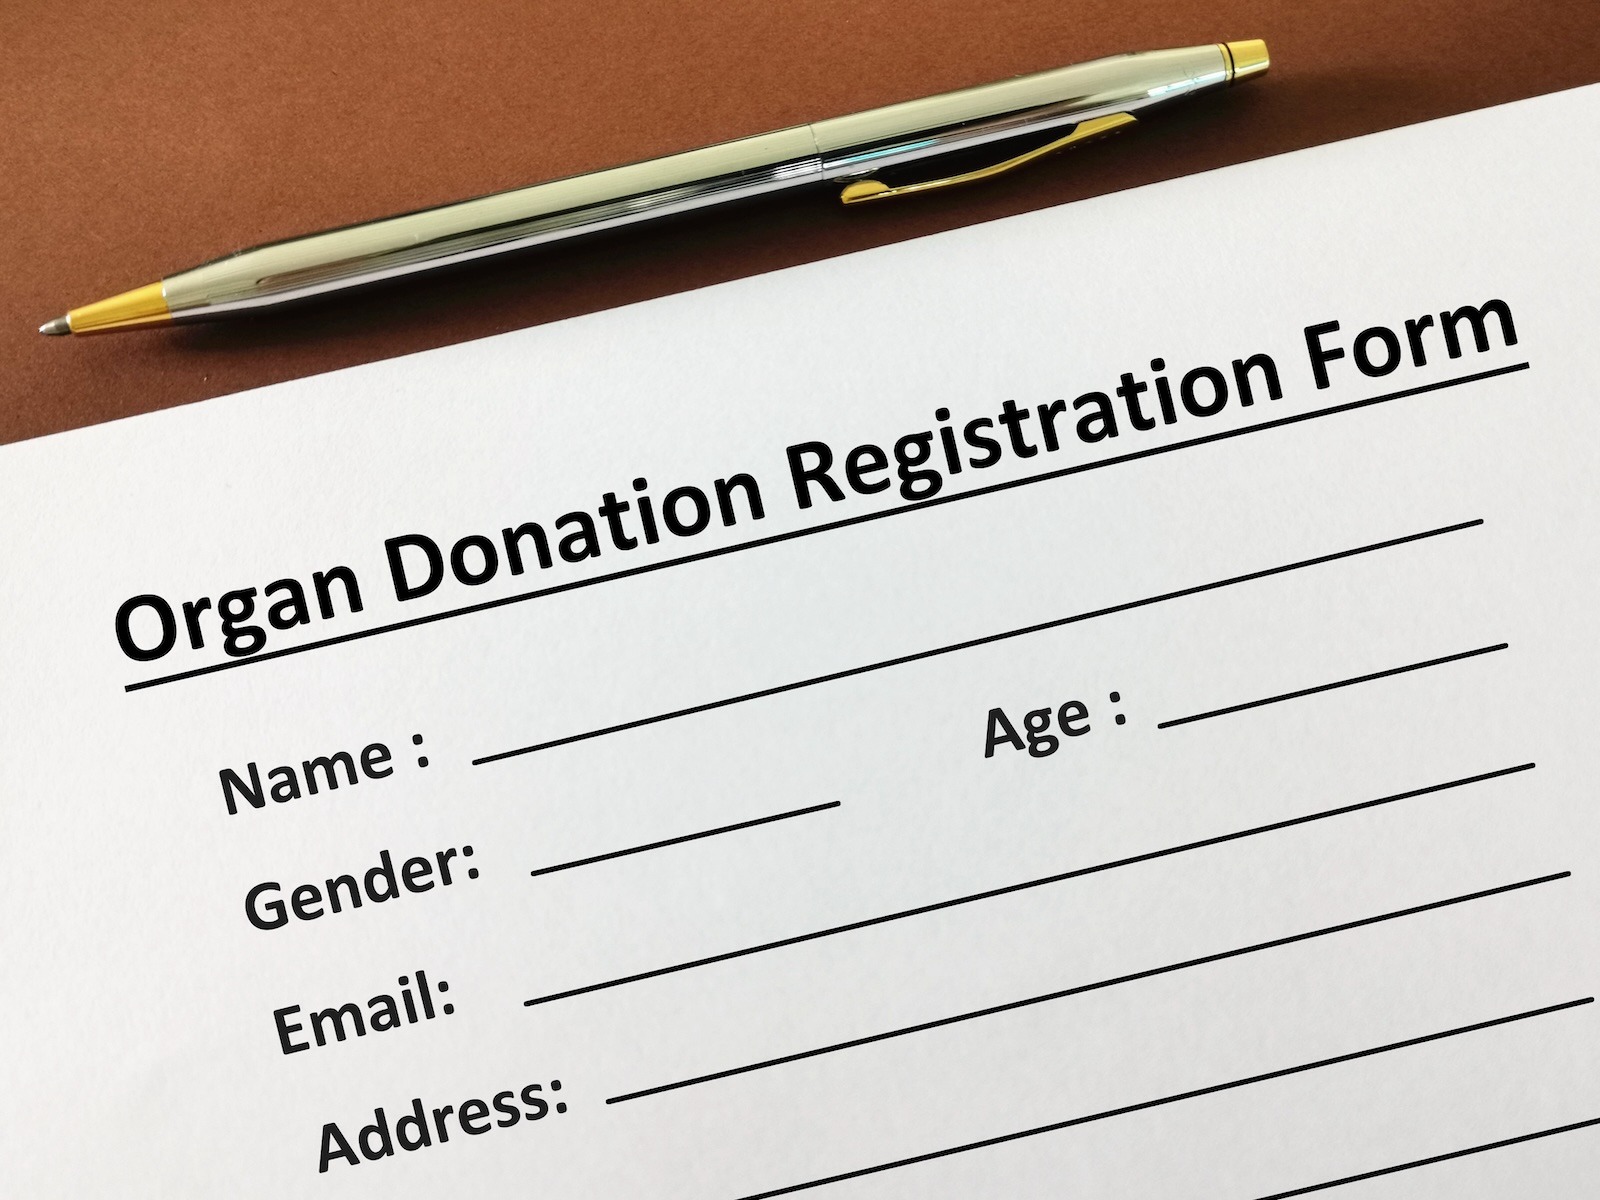 Estate Planning. Organ Donation. Funeral planning. Image of an organ donation registration form with registrant details to be completed. A pen for signing.